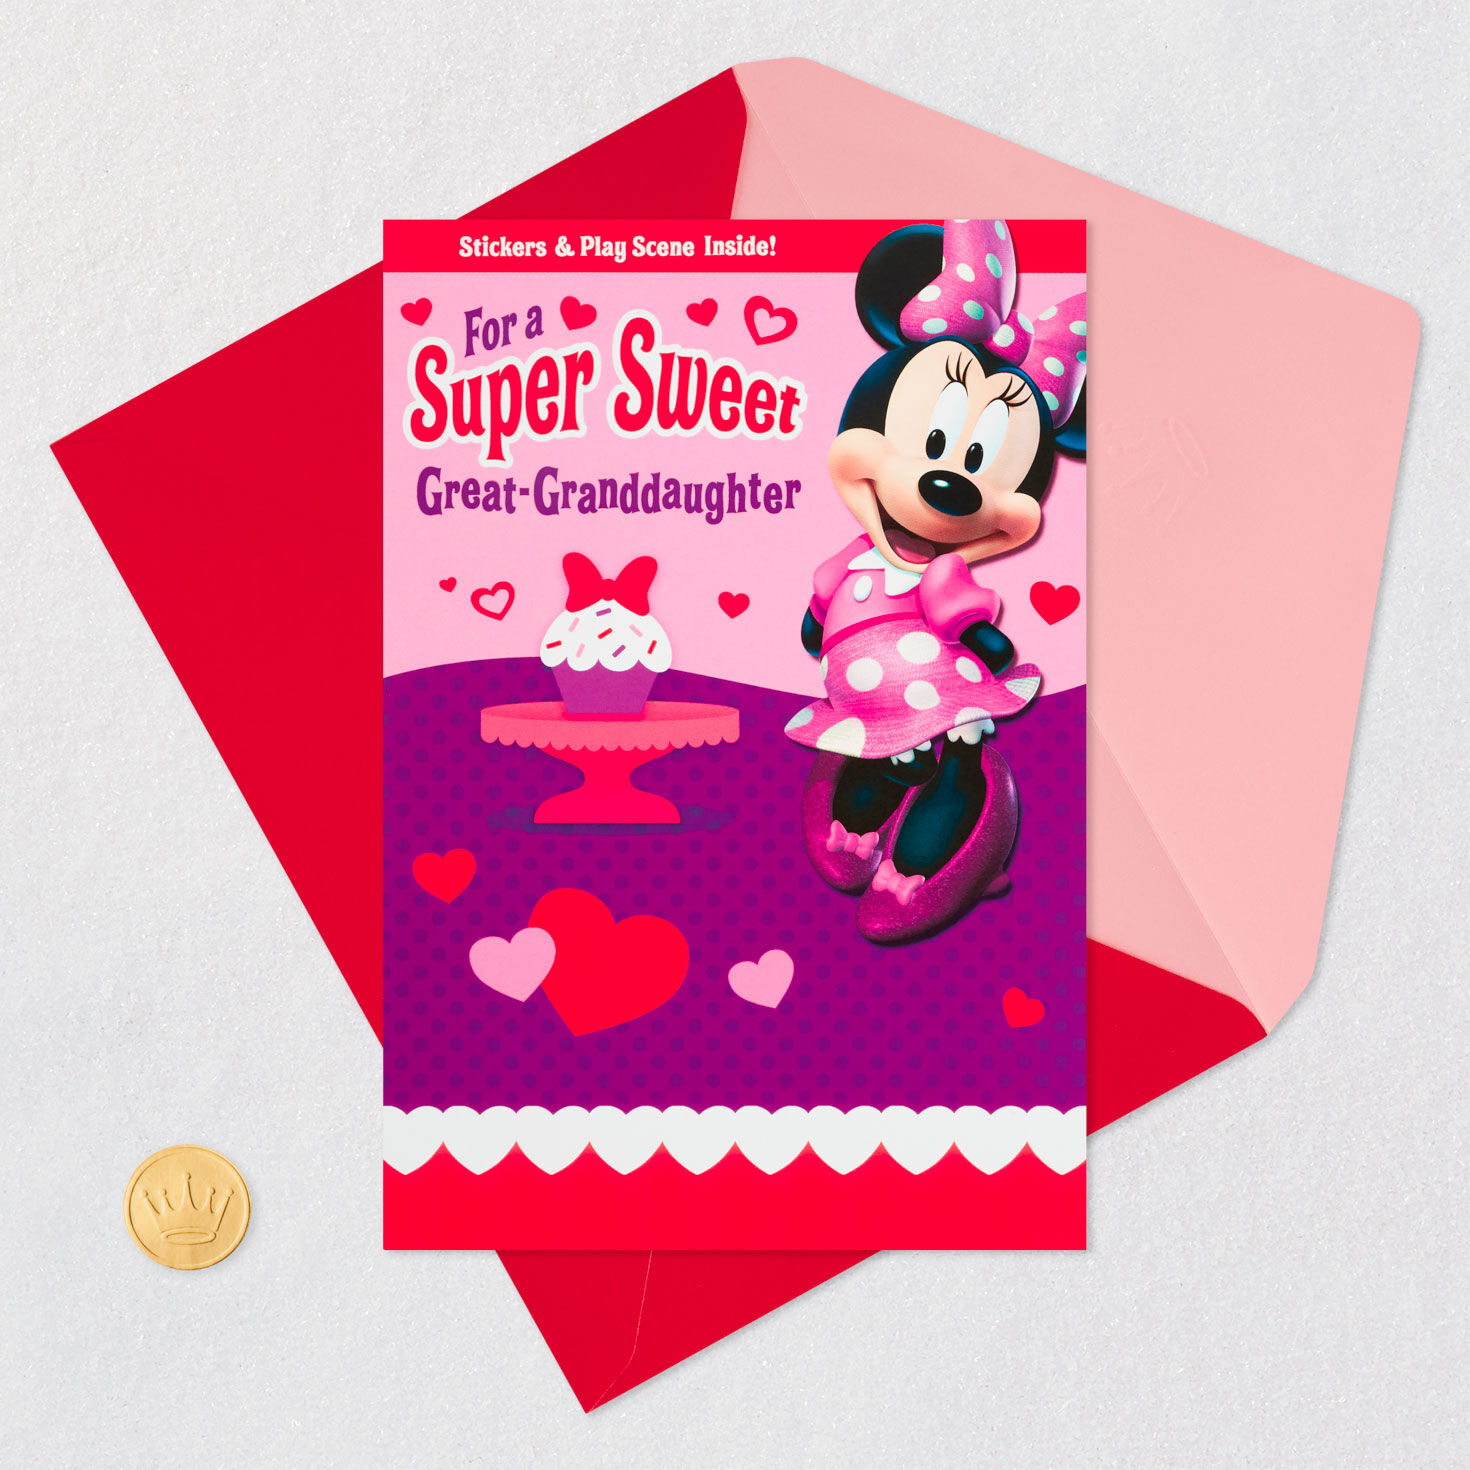 Disney Junior Minnie Mouse Valentine's Day Card for Great-Granddaughter With Sticker Activity for only USD 3.99 | Hallmark